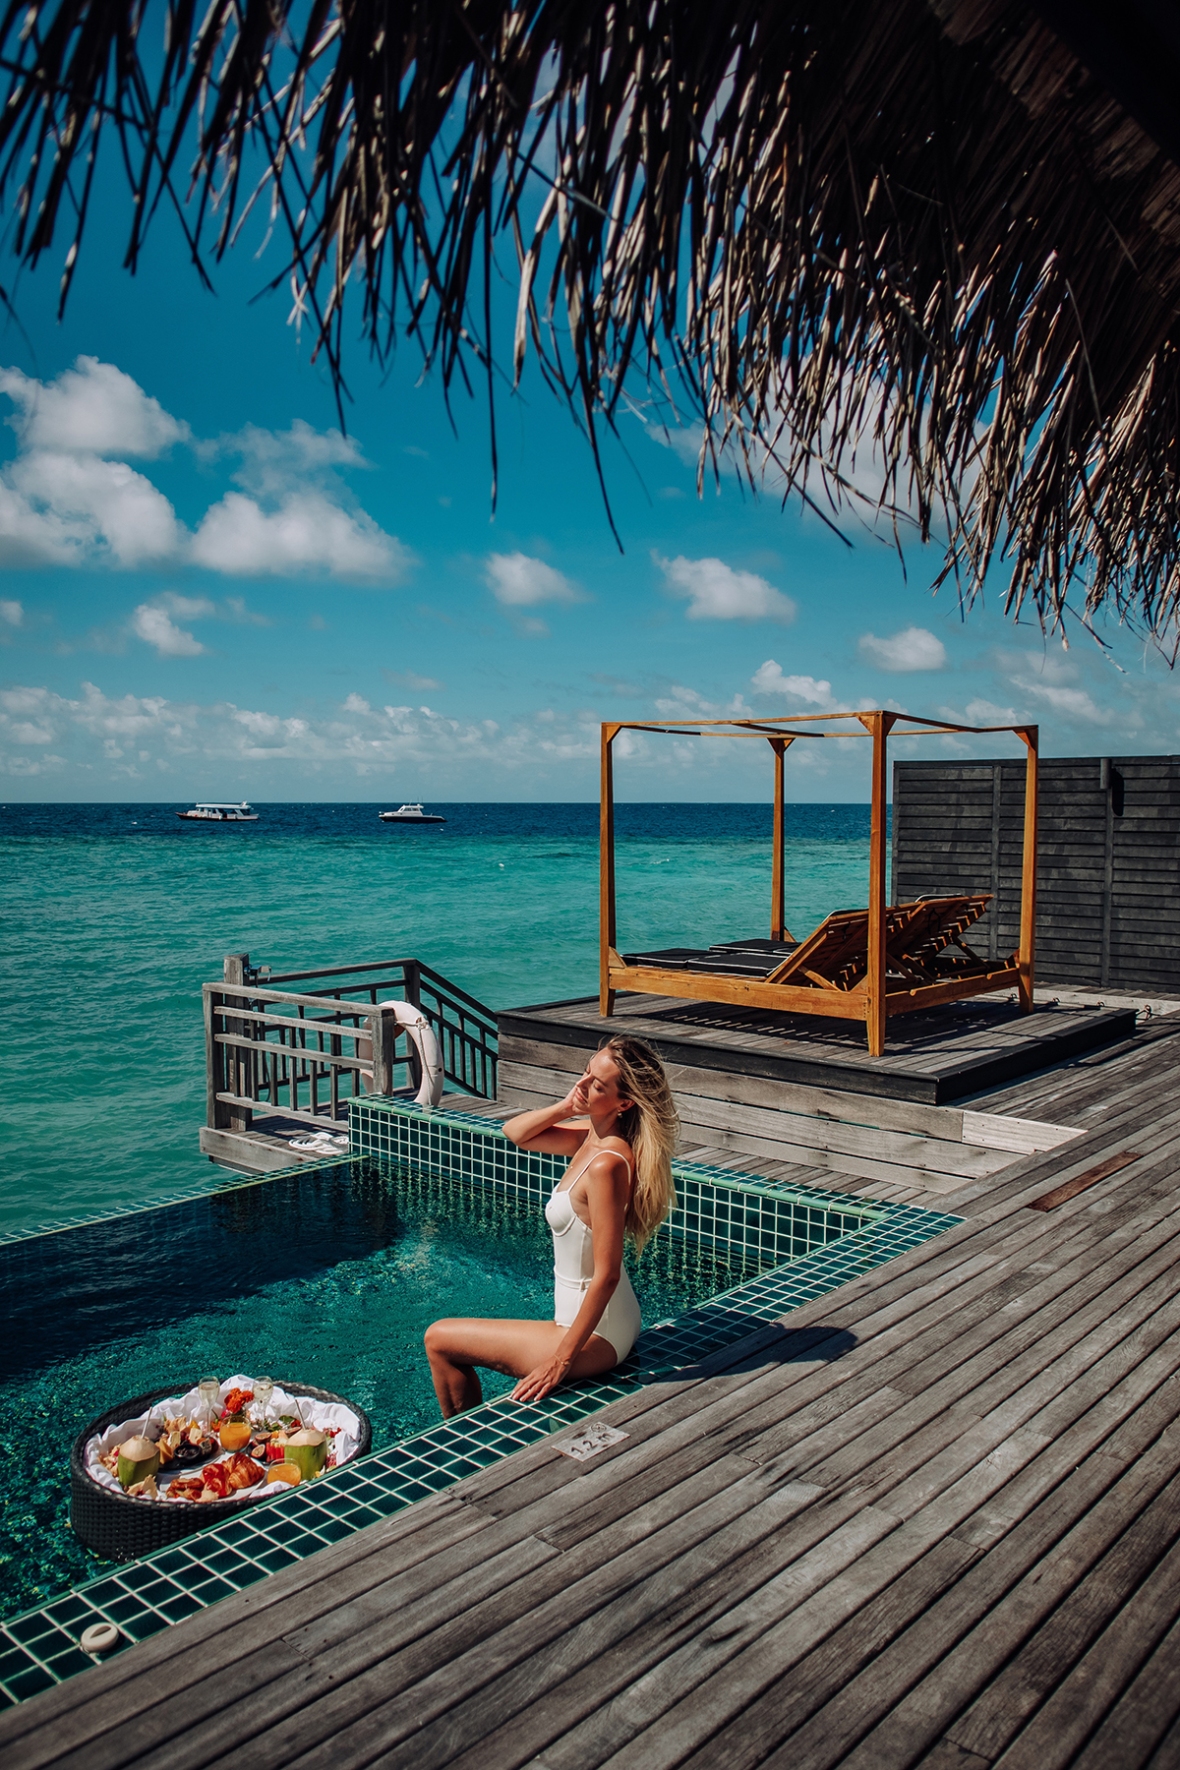 Review Outrigger Konotta Maldives Overwatervilla Floating Breakfast